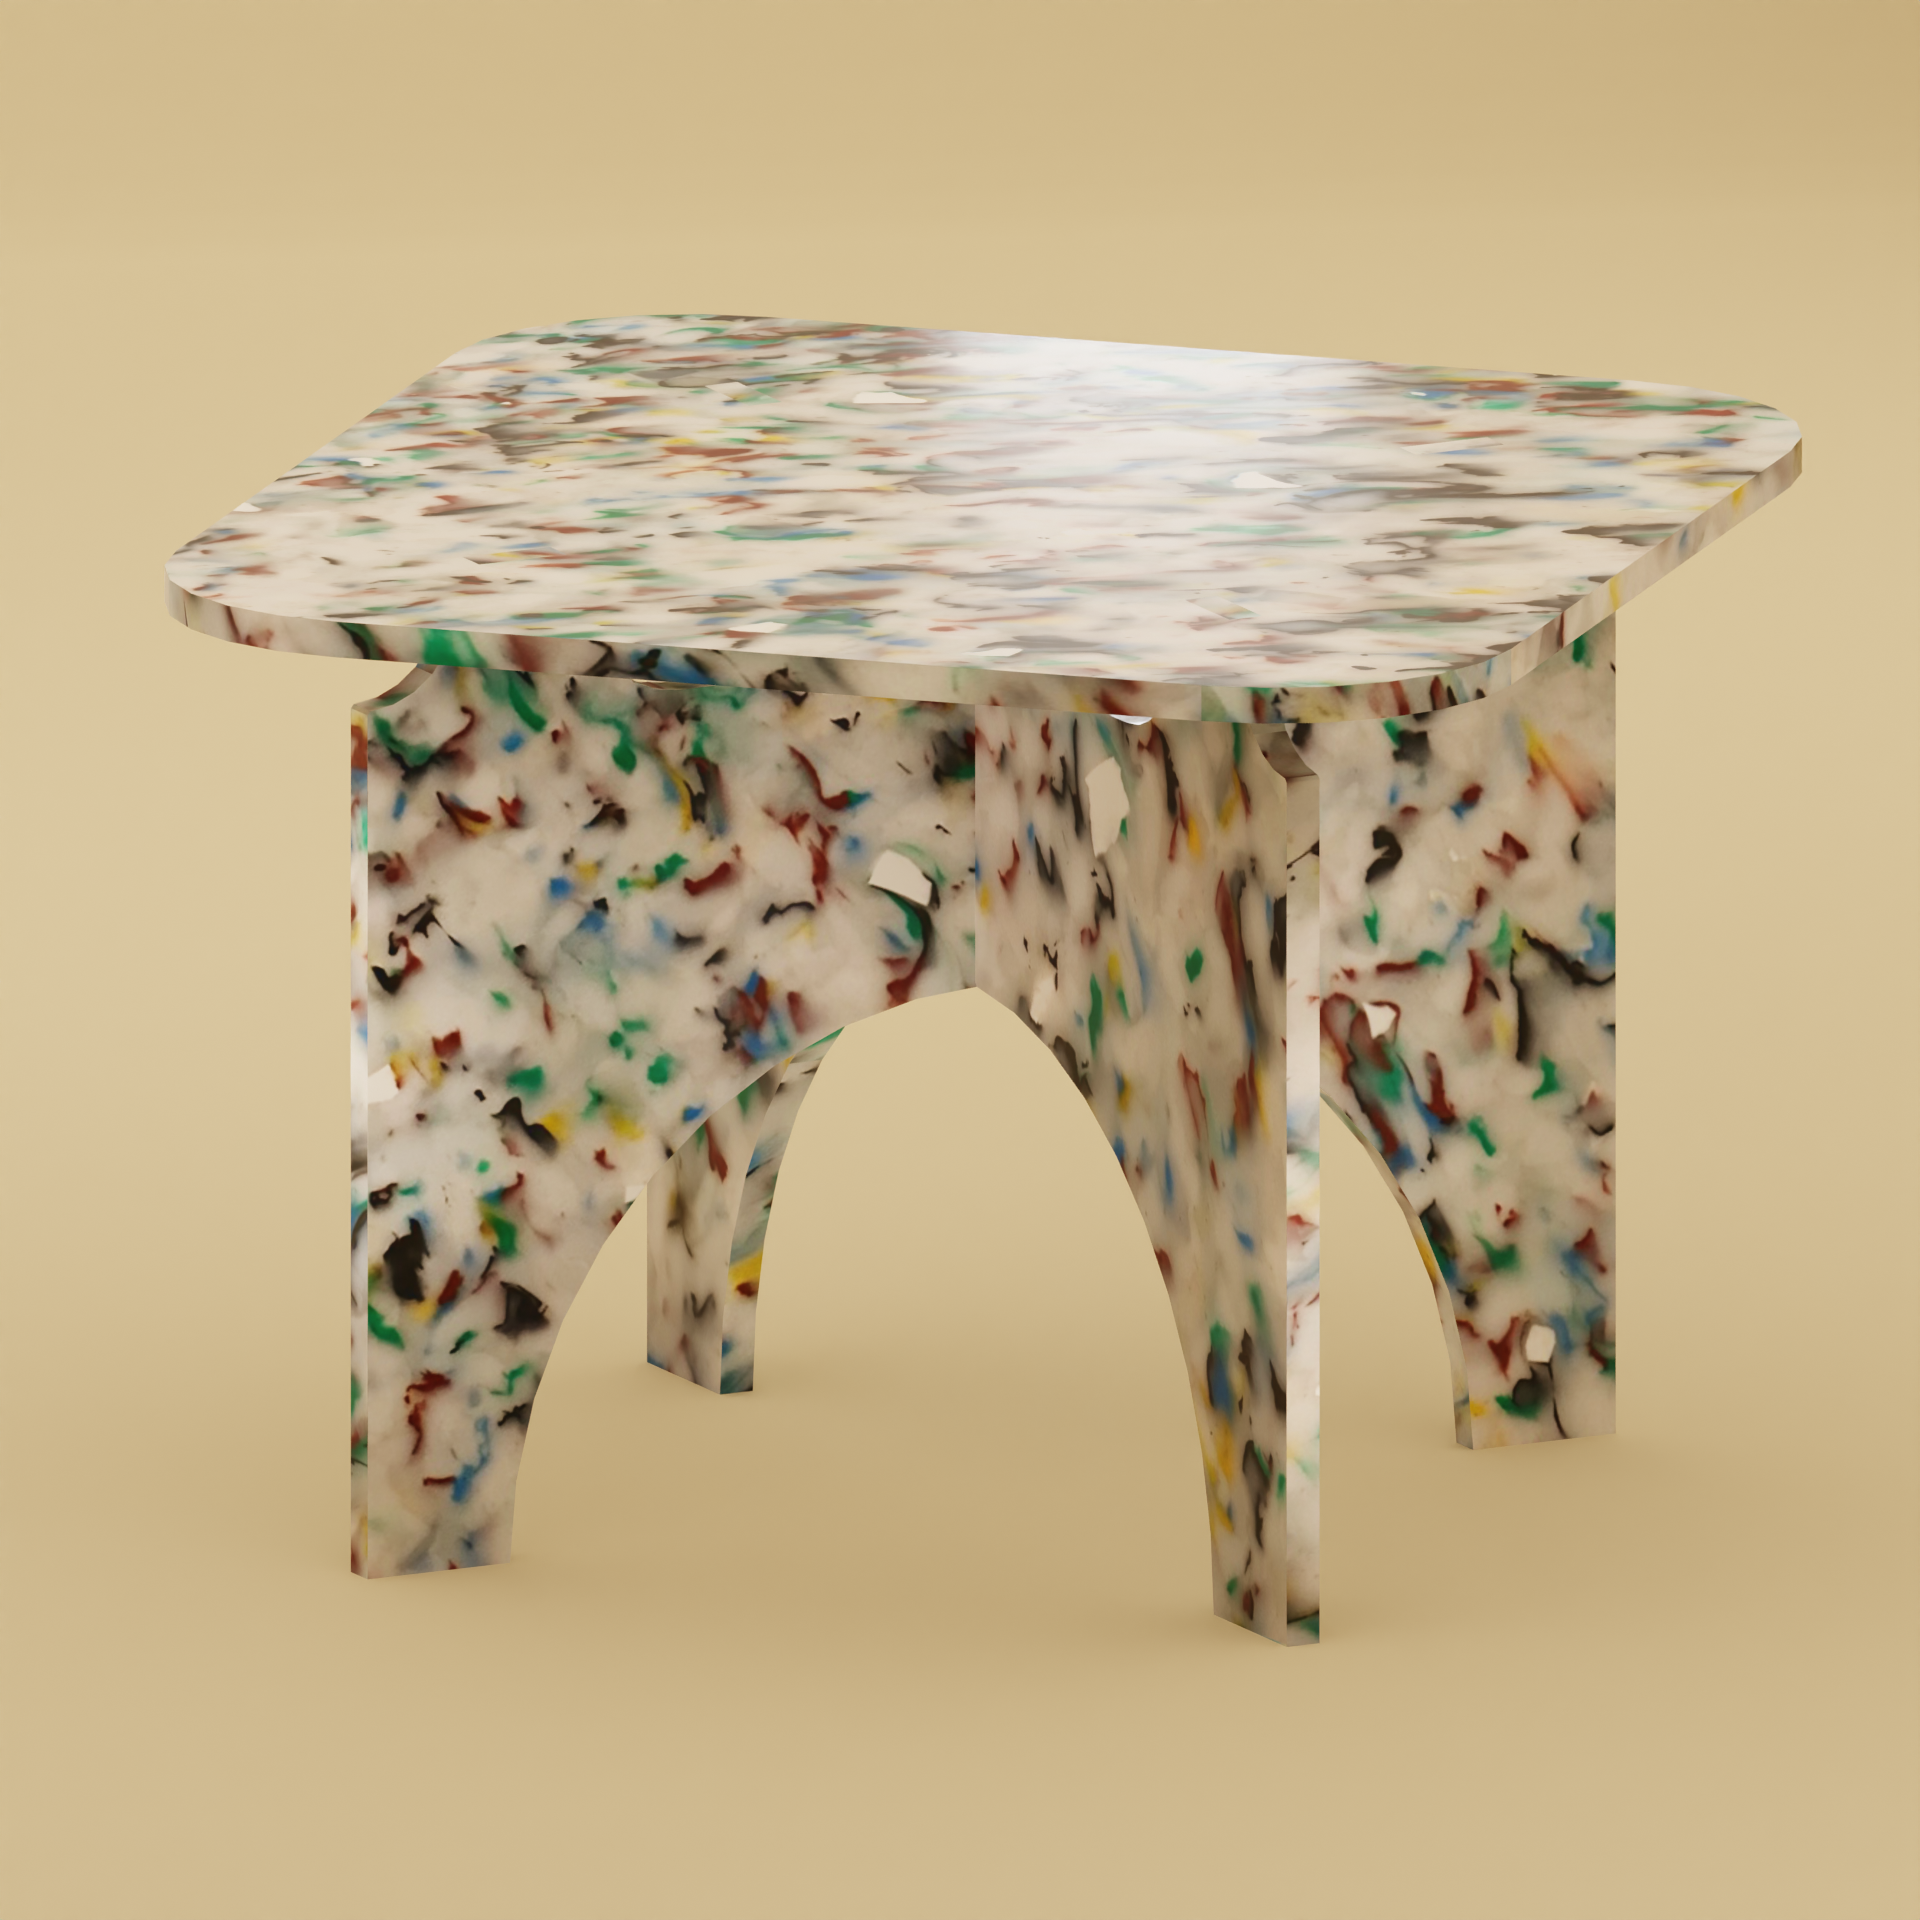 COLOURFUL SQUARE TOP TABLE BY THE MINIMONO PROJECT - BRAND FOR ECO FRIENDLY - PLAYFUL - MULTI FUNCTIONAL - SUSTAINABLE - HIGH QUALITY - DESIGN FURNITURE FROM RECYCLED PLASTIC FOR BOTH ADULT AND CHILDREN MADE IN BERLIN GERMANY